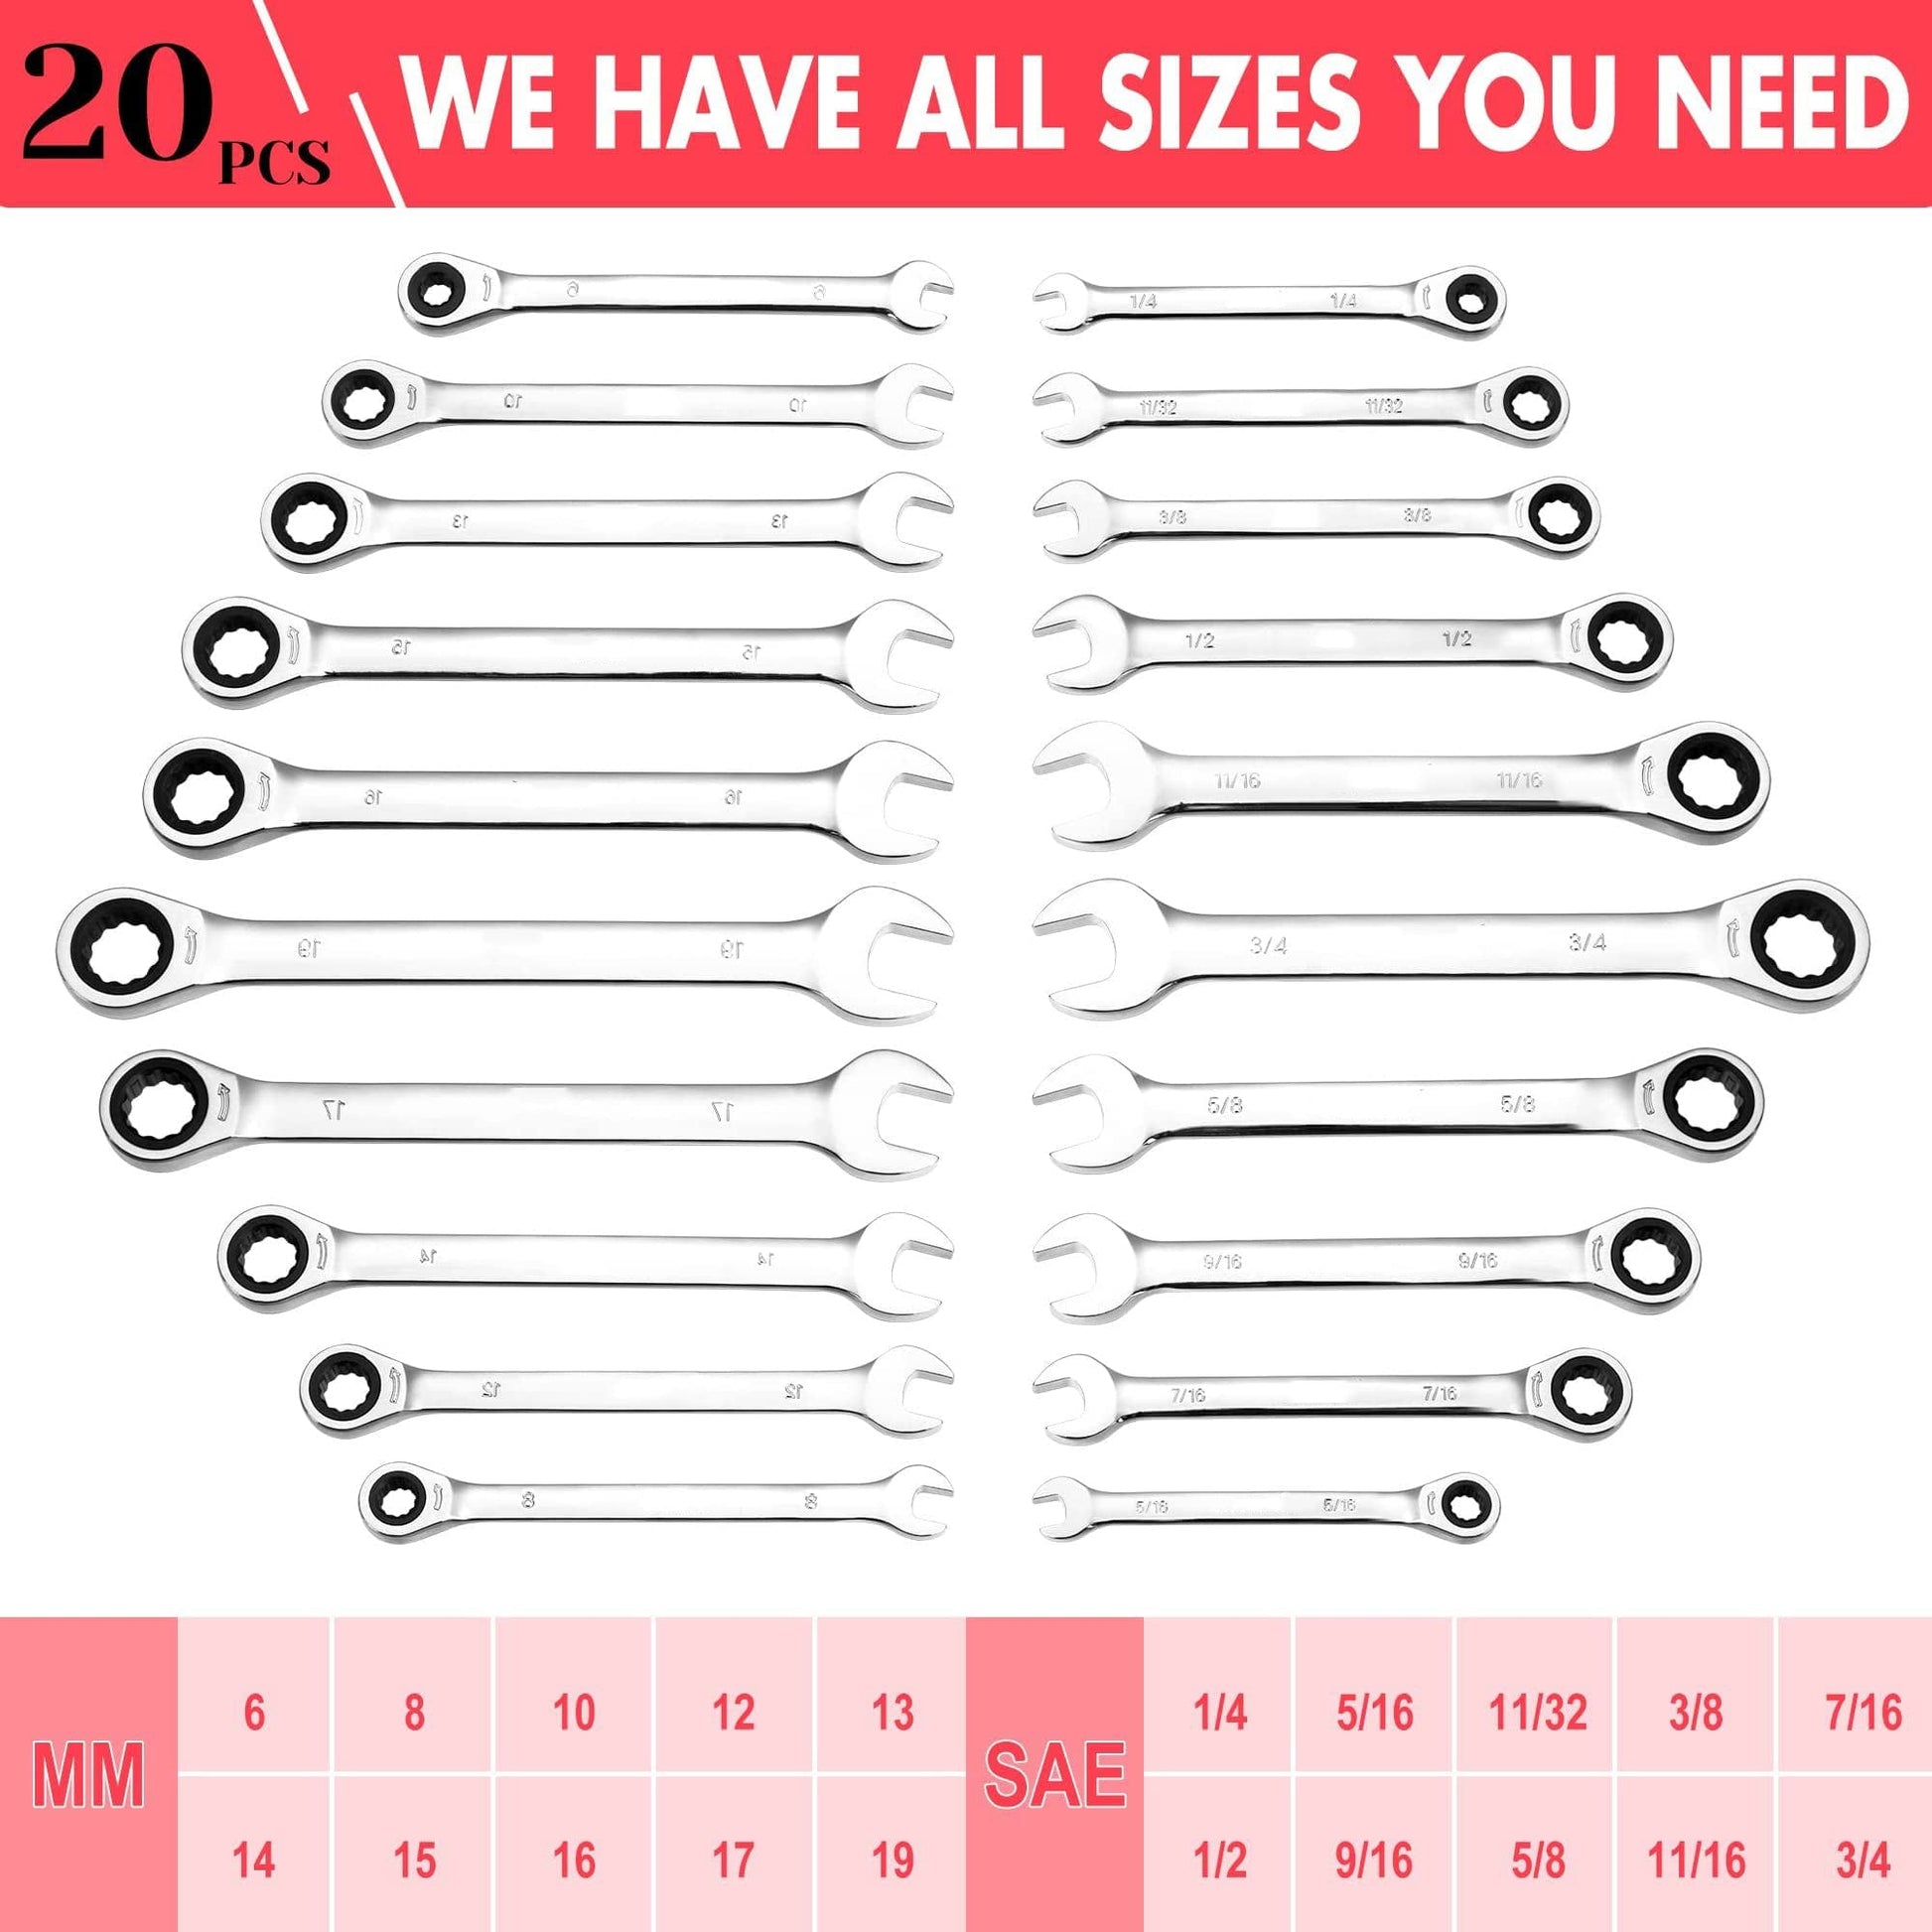 GARVEE 20-Piece SAE Metric Ratcheting Combination Wrench Set Ratchet Wrenches Set